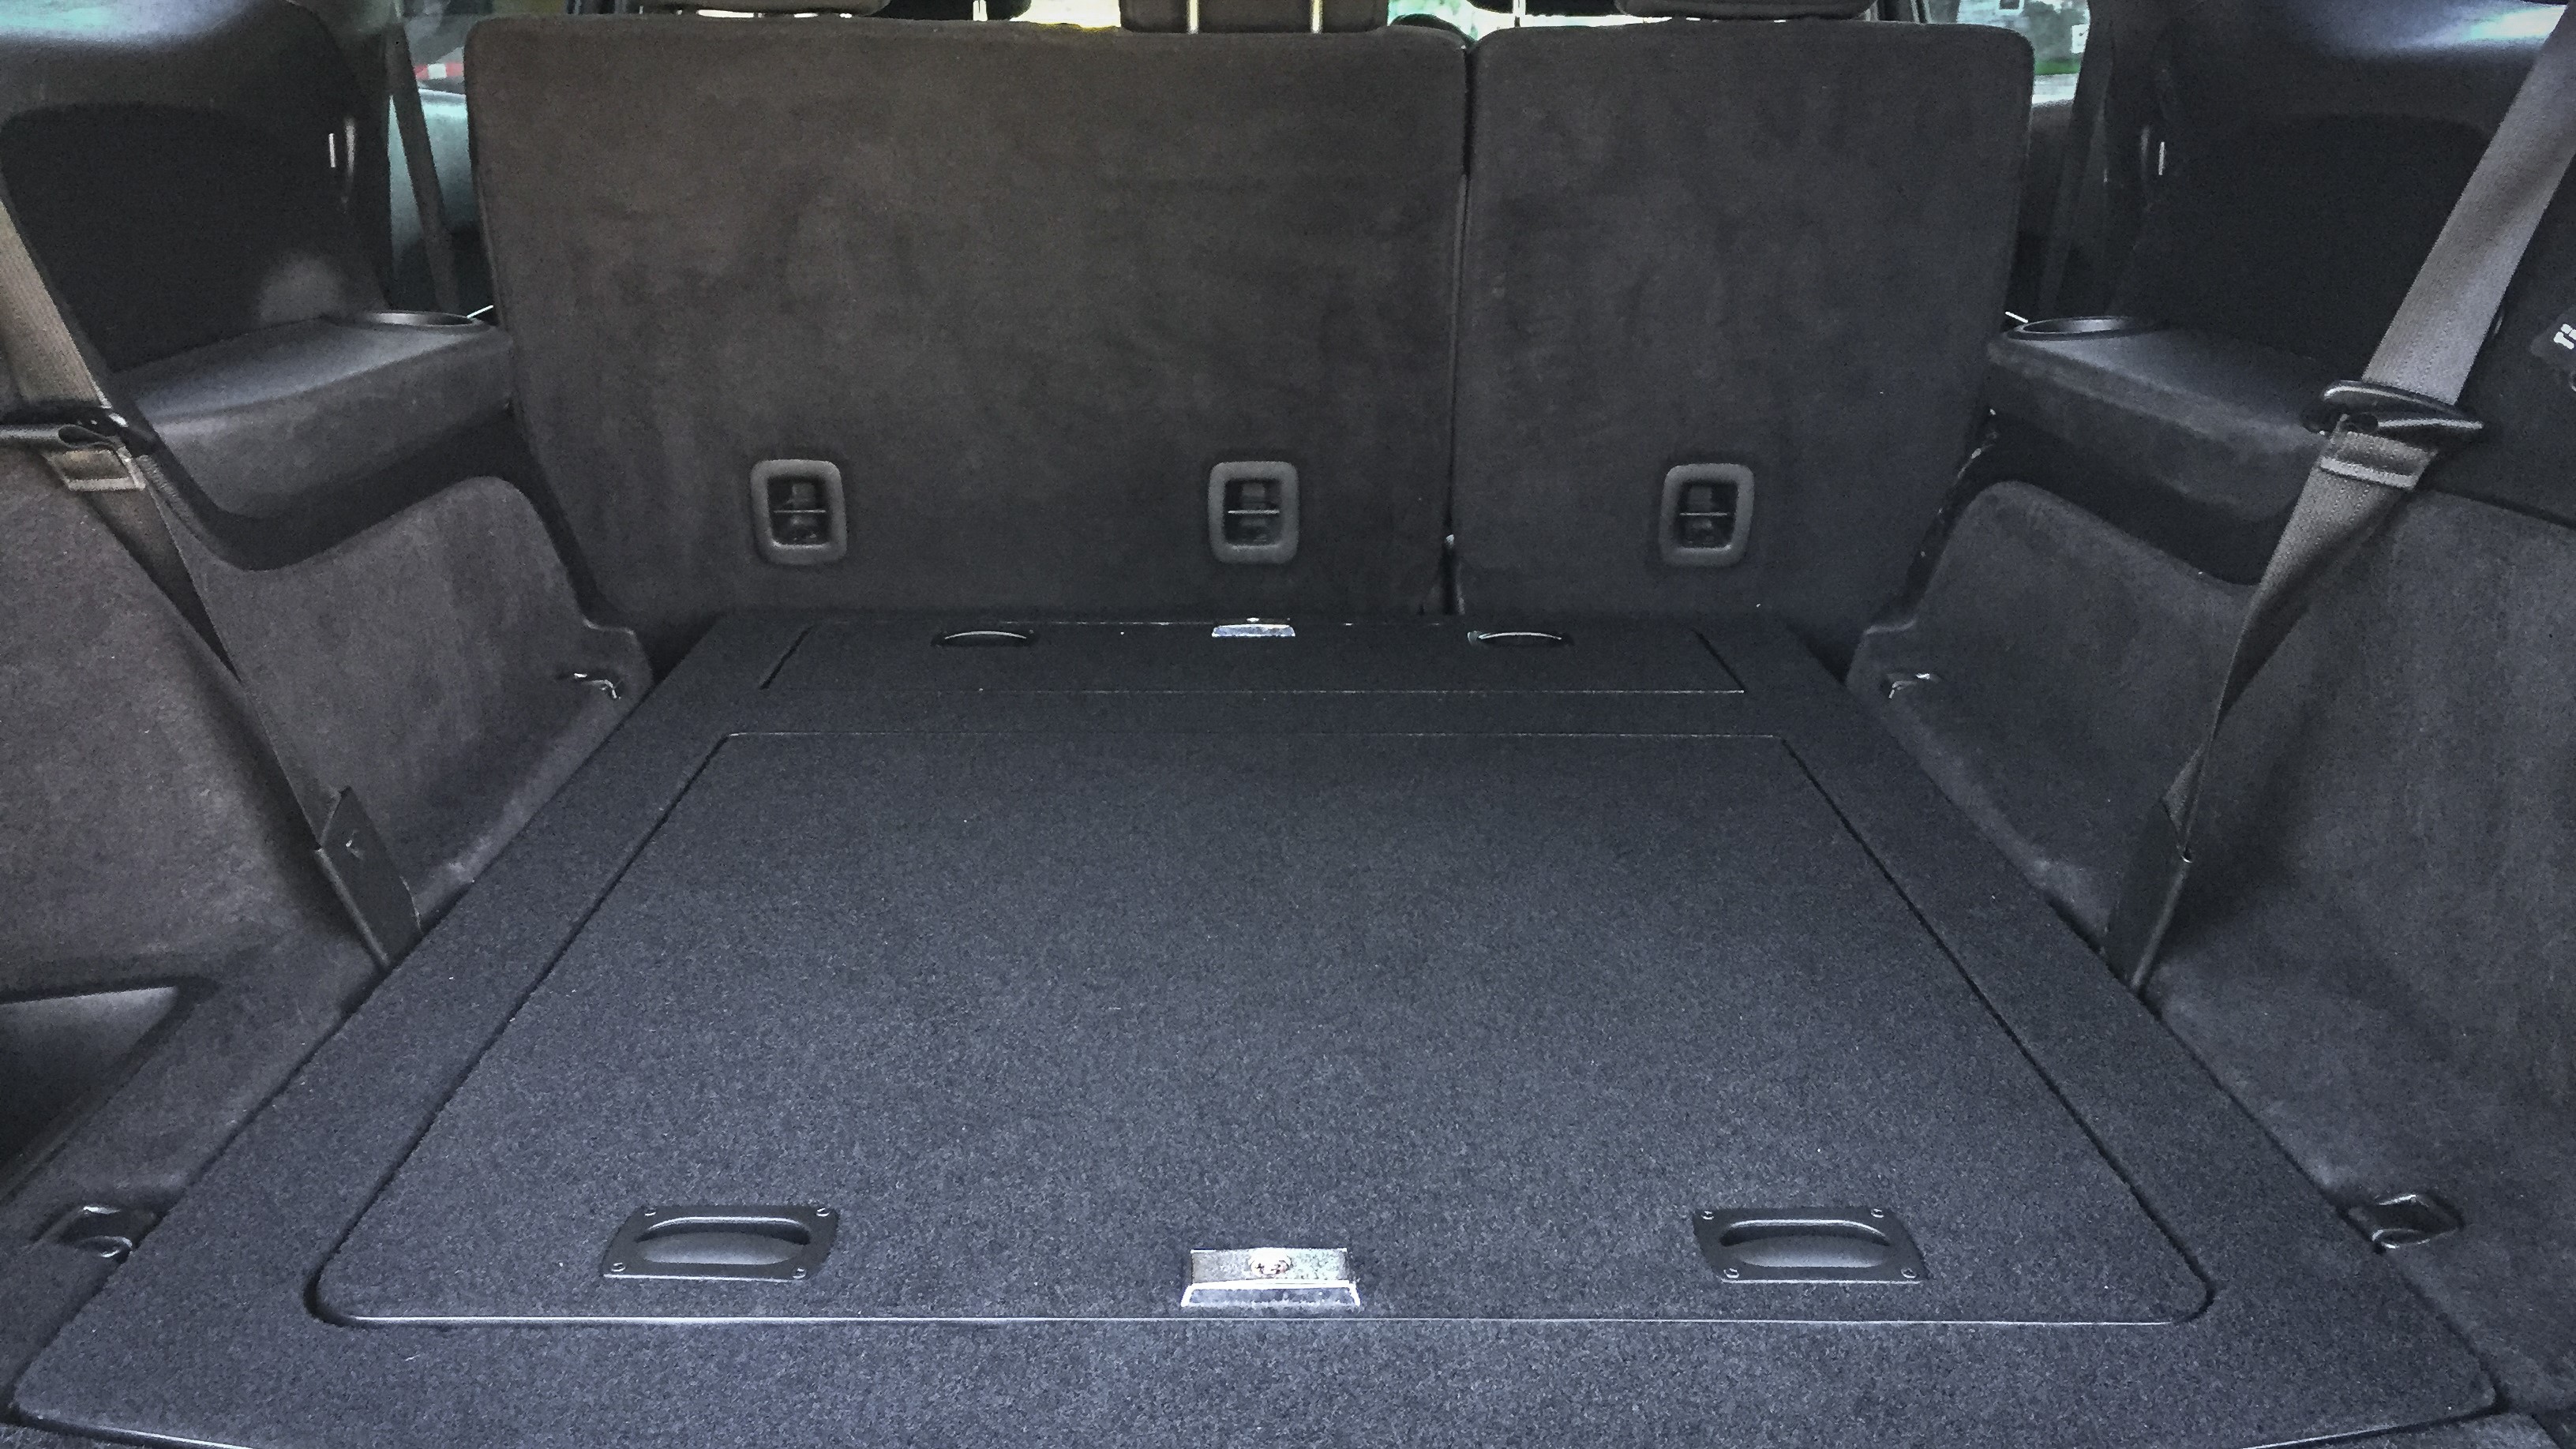 A FloorVault installed in the back of a Dodge Durango.